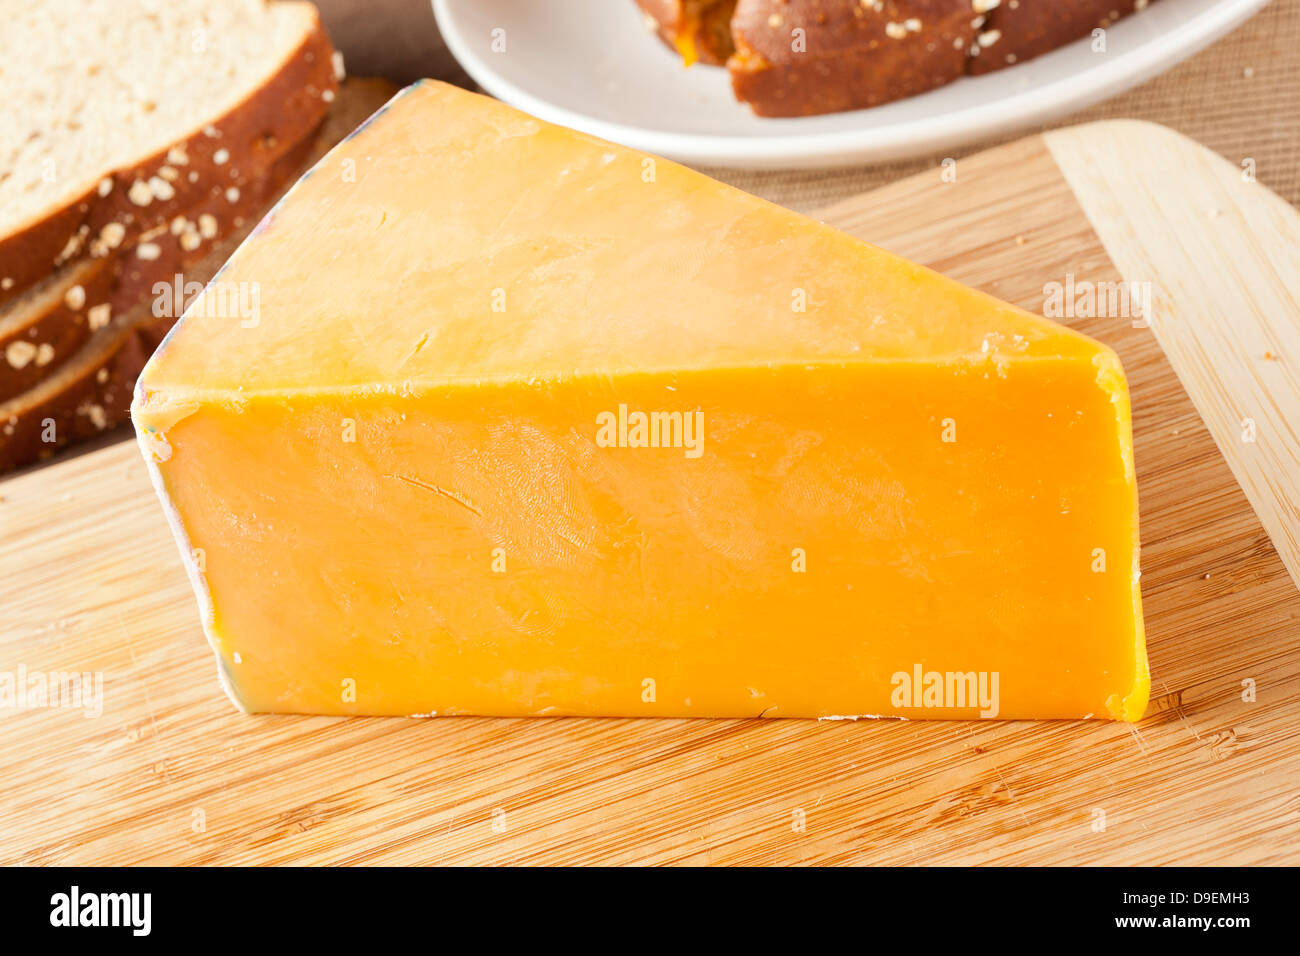 Traditional Yellow Cheddar Cheese on a background Stock Photo